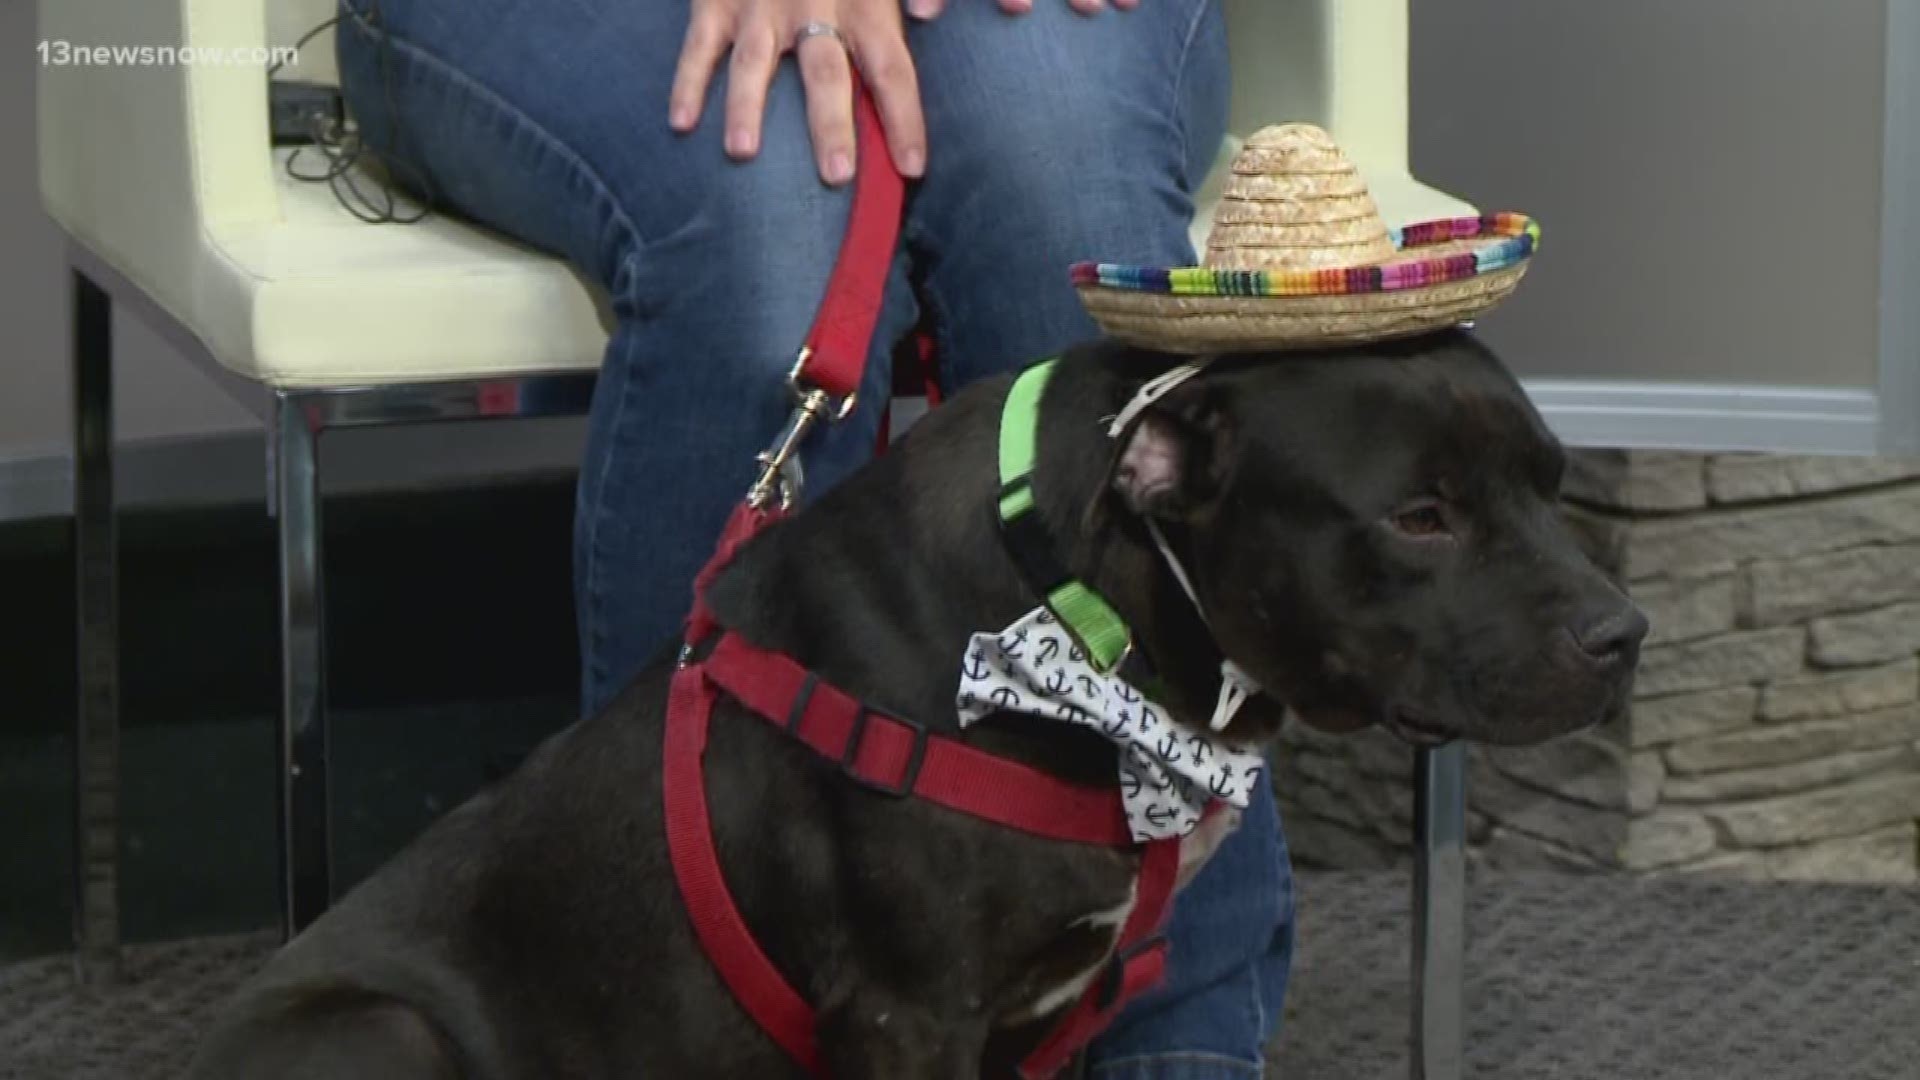 Meet Bowser, a 3-year-old pit bull mix breed, who is looking for his forever home.